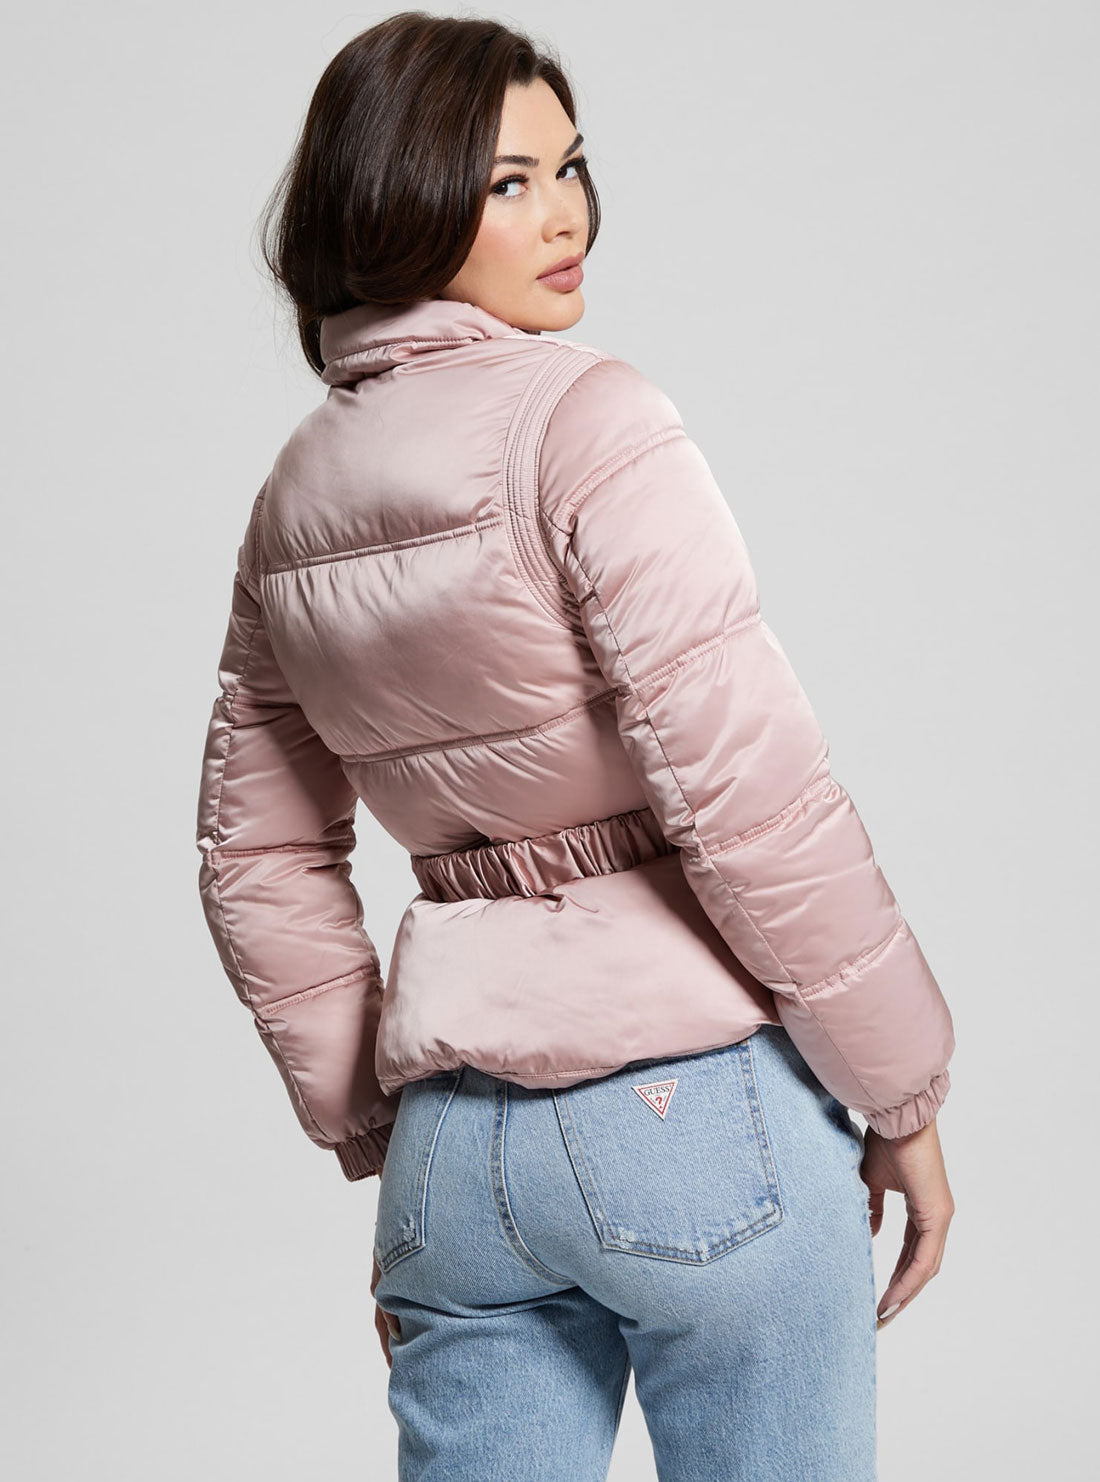 GUESS Pink Lucia Bum Bag Puffer Jacket side view